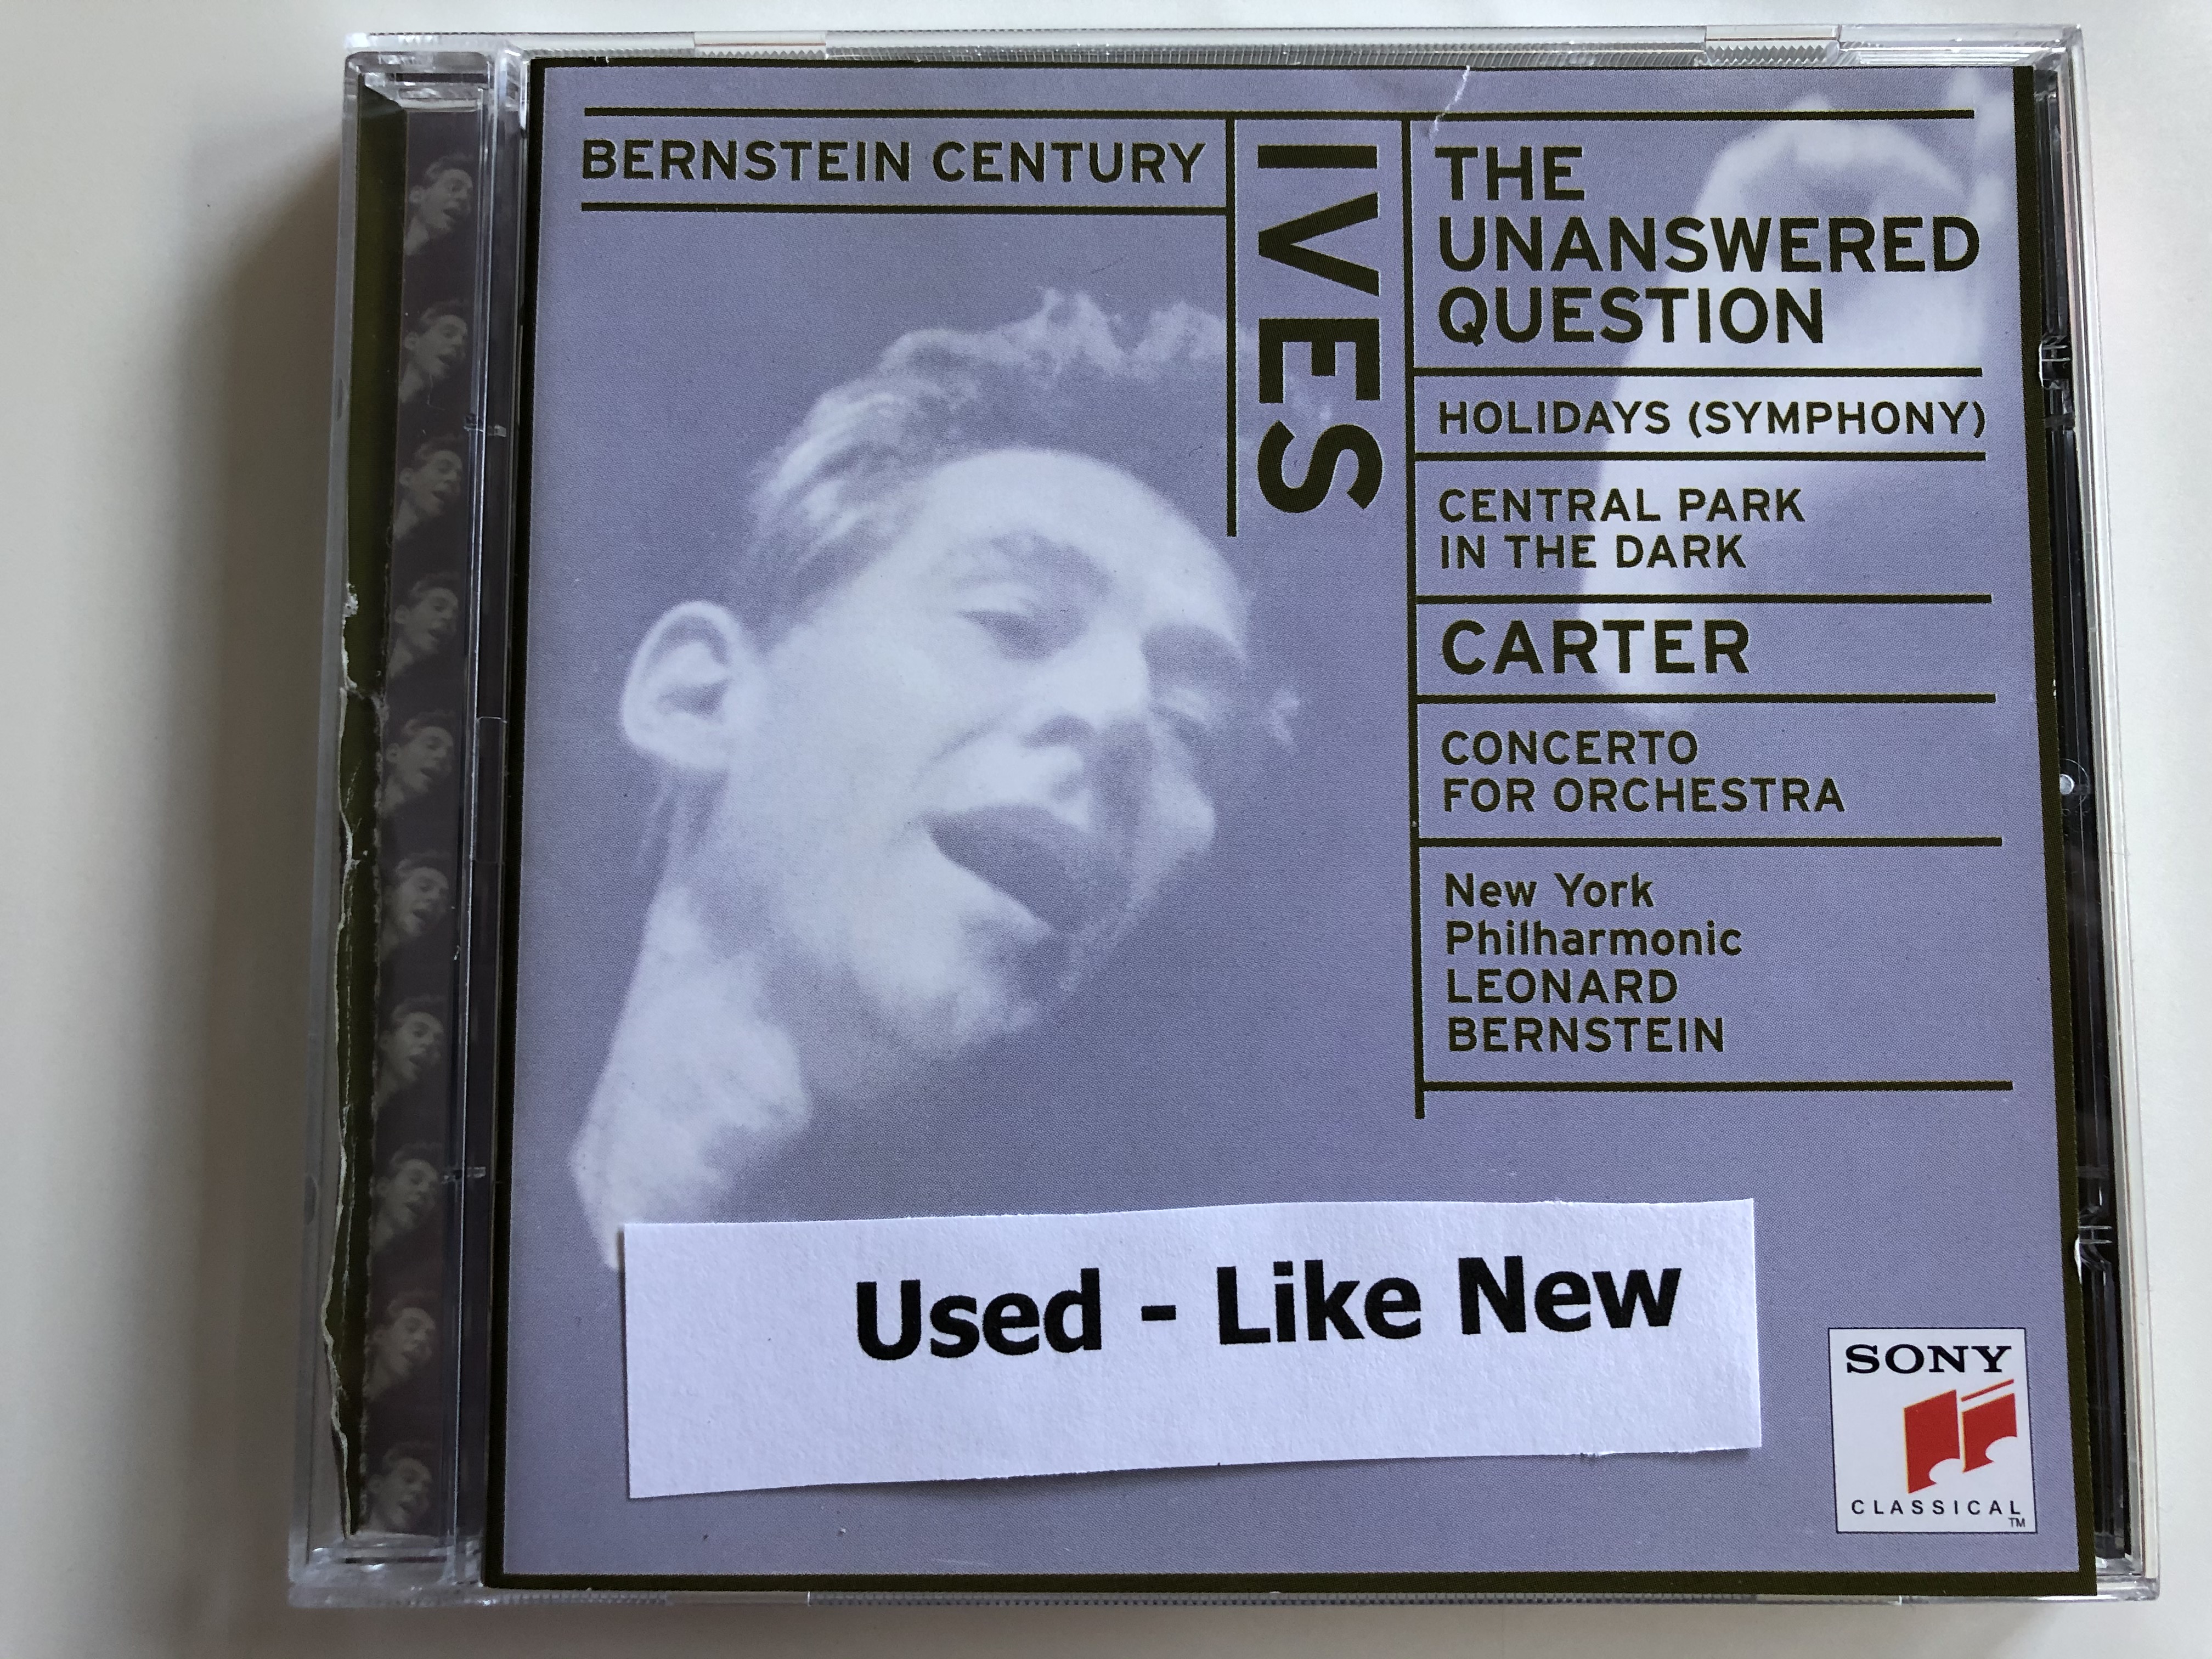 bernstein-century-ives-the-unanswered-question-holidays-symphony-central-park-in-the-dark-carter-concerto-for-orchestra-new-york-philharmonic-leonard-bernstein-sony-classical-audio-c-1-.jpg